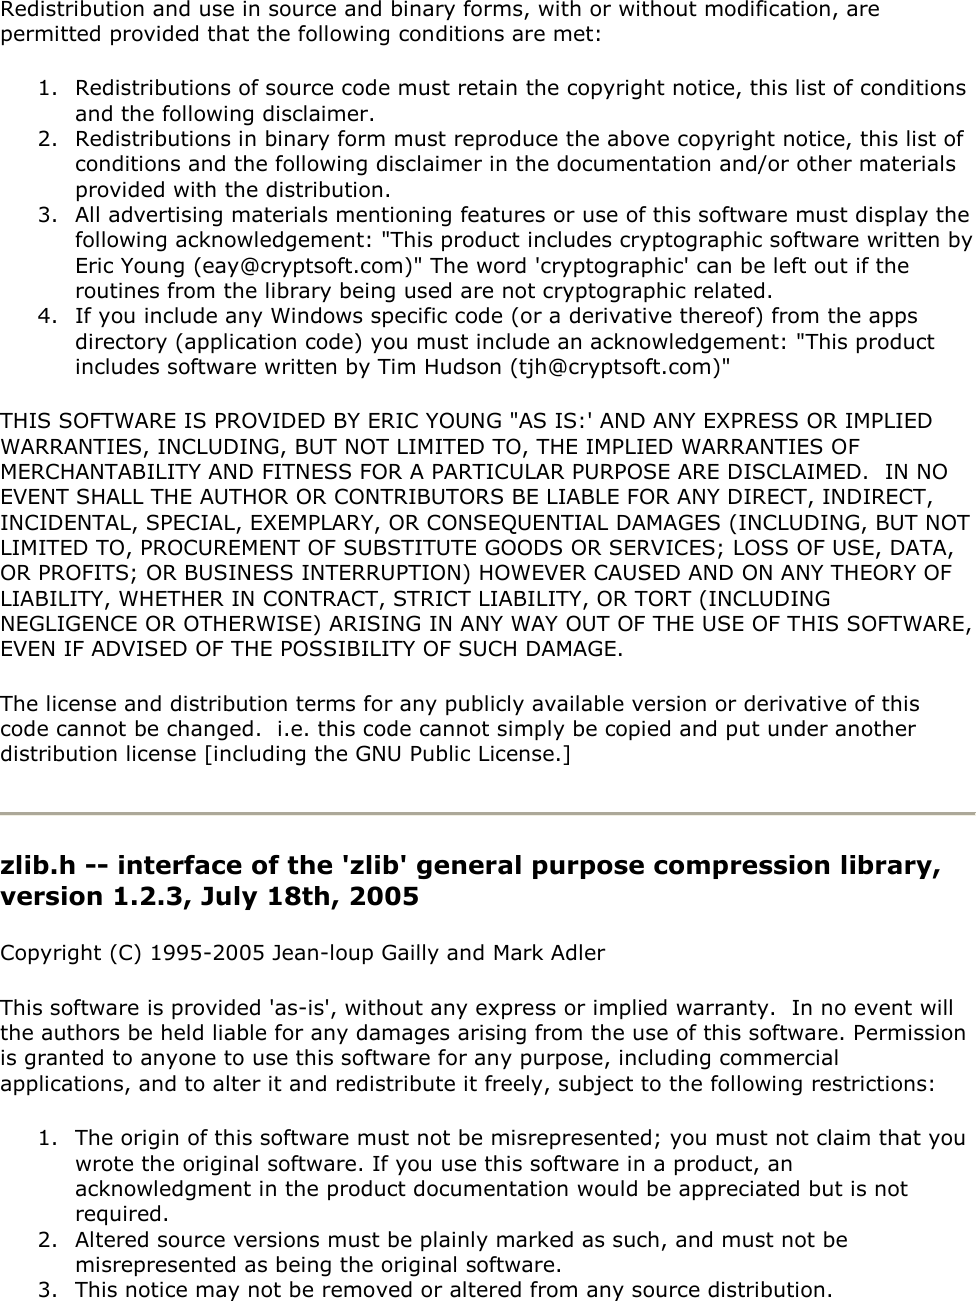 Redistribution and use in source and binary forms, with or without modification, are permitted provided that the following conditions are met: 1. Redistributions of source code must retain the copyright notice, this list of conditions and the following disclaimer. 2. Redistributions in binary form must reproduce the above copyright notice, this list of conditions and the following disclaimer in the documentation and/or other materials provided with the distribution. 3. All advertising materials mentioning features or use of this software must display the following acknowledgement: &quot;This product includes cryptographic software written by Eric Young (eay@cryptsoft.com)&quot; The word &apos;cryptographic&apos; can be left out if the routines from the library being used are not cryptographic related.  4. If you include any Windows specific code (or a derivative thereof) from the apps directory (application code) you must include an acknowledgement: &quot;This product includes software written by Tim Hudson (tjh@cryptsoft.com)&quot; THIS SOFTWARE IS PROVIDED BY ERIC YOUNG &quot;AS IS:&apos; AND ANY EXPRESS OR IMPLIED WARRANTIES, INCLUDING, BUT NOT LIMITED TO, THE IMPLIED WARRANTIES OF MERCHANTABILITY AND FITNESS FOR A PARTICULAR PURPOSE ARE DISCLAIMED.  IN NO EVENT SHALL THE AUTHOR OR CONTRIBUTORS BE LIABLE FOR ANY DIRECT, INDIRECT, INCIDENTAL, SPECIAL, EXEMPLARY, OR CONSEQUENTIAL DAMAGES (INCLUDING, BUT NOT LIMITED TO, PROCUREMENT OF SUBSTITUTE GOODS OR SERVICES; LOSS OF USE, DATA, OR PROFITS; OR BUSINESS INTERRUPTION) HOWEVER CAUSED AND ON ANY THEORY OF LIABILITY, WHETHER IN CONTRACT, STRICT LIABILITY, OR TORT (INCLUDING NEGLIGENCE OR OTHERWISE) ARISING IN ANY WAY OUT OF THE USE OF THIS SOFTWARE, EVEN IF ADVISED OF THE POSSIBILITY OF SUCH DAMAGE. The license and distribution terms for any publicly available version or derivative of this code cannot be changed.  i.e. this code cannot simply be copied and put under another distribution license [including the GNU Public License.]  zlib.h -- interface of the &apos;zlib&apos; general purpose compression library, version 1.2.3, July 18th, 2005 Copyright (C) 1995-2005 Jean-loup Gailly and Mark Adler This software is provided &apos;as-is&apos;, without any express or implied warranty.  In no event will the authors be held liable for any damages arising from the use of this software. Permission is granted to anyone to use this software for any purpose, including commercial applications, and to alter it and redistribute it freely, subject to the following restrictions: 1. The origin of this software must not be misrepresented; you must not claim that you wrote the original software. If you use this software in a product, an acknowledgment in the product documentation would be appreciated but is not required. 2. Altered source versions must be plainly marked as such, and must not be misrepresented as being the original software. 3. This notice may not be removed or altered from any source distribution. 